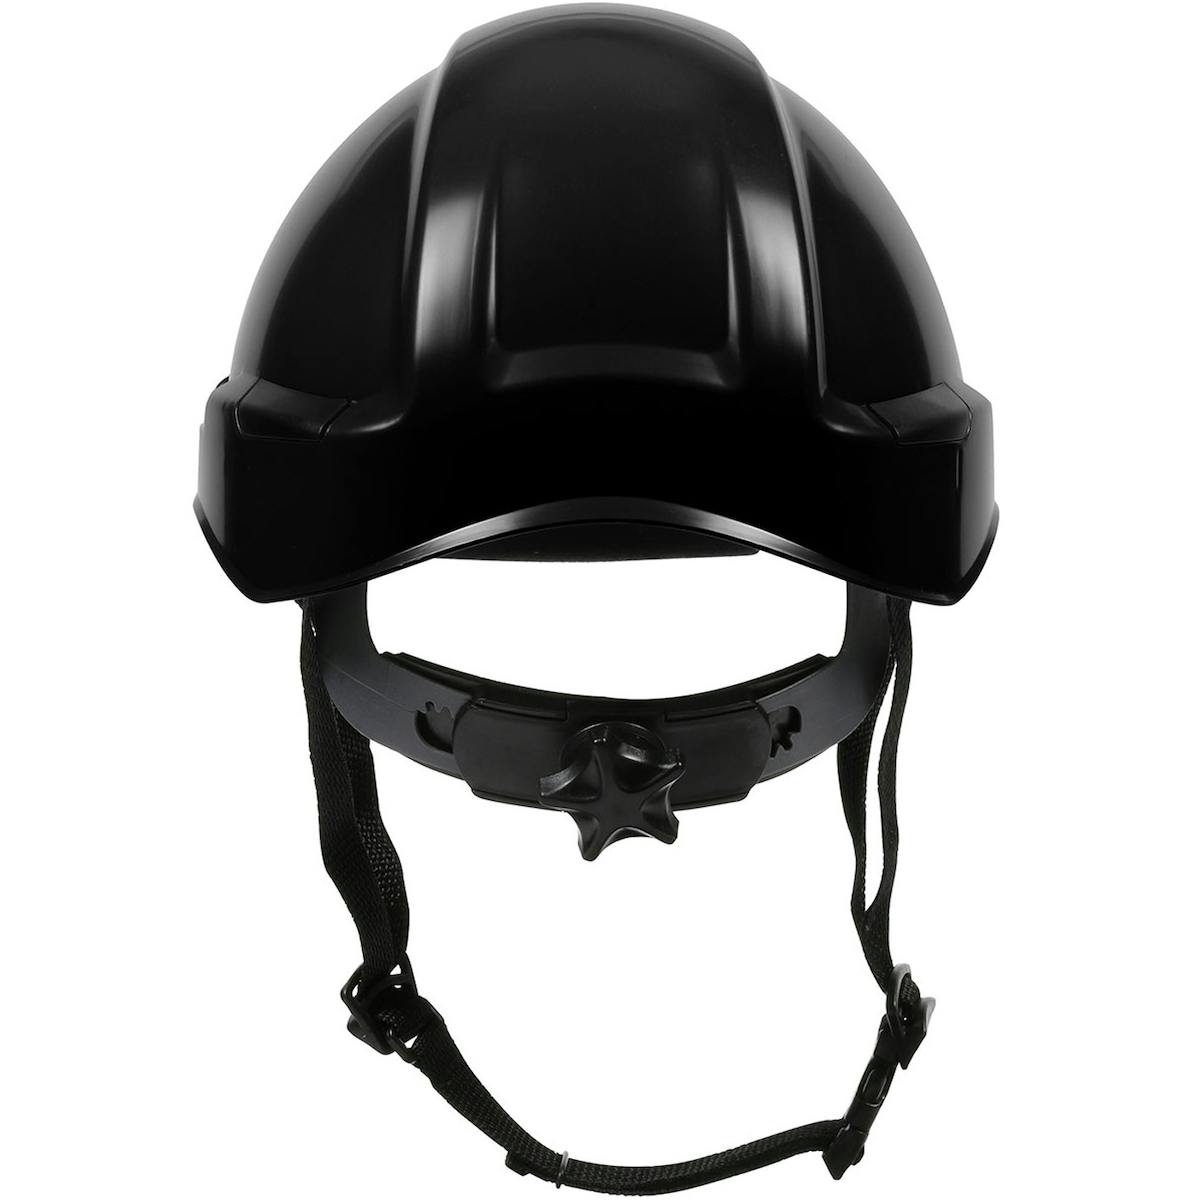 Rocky™ Industrial Climbing Helmet with Polycarbonate / ABS Shell, Nylon Suspension, Wheel Ratchet Adjustment and 4-Point Chin Strap (280-HP141R)